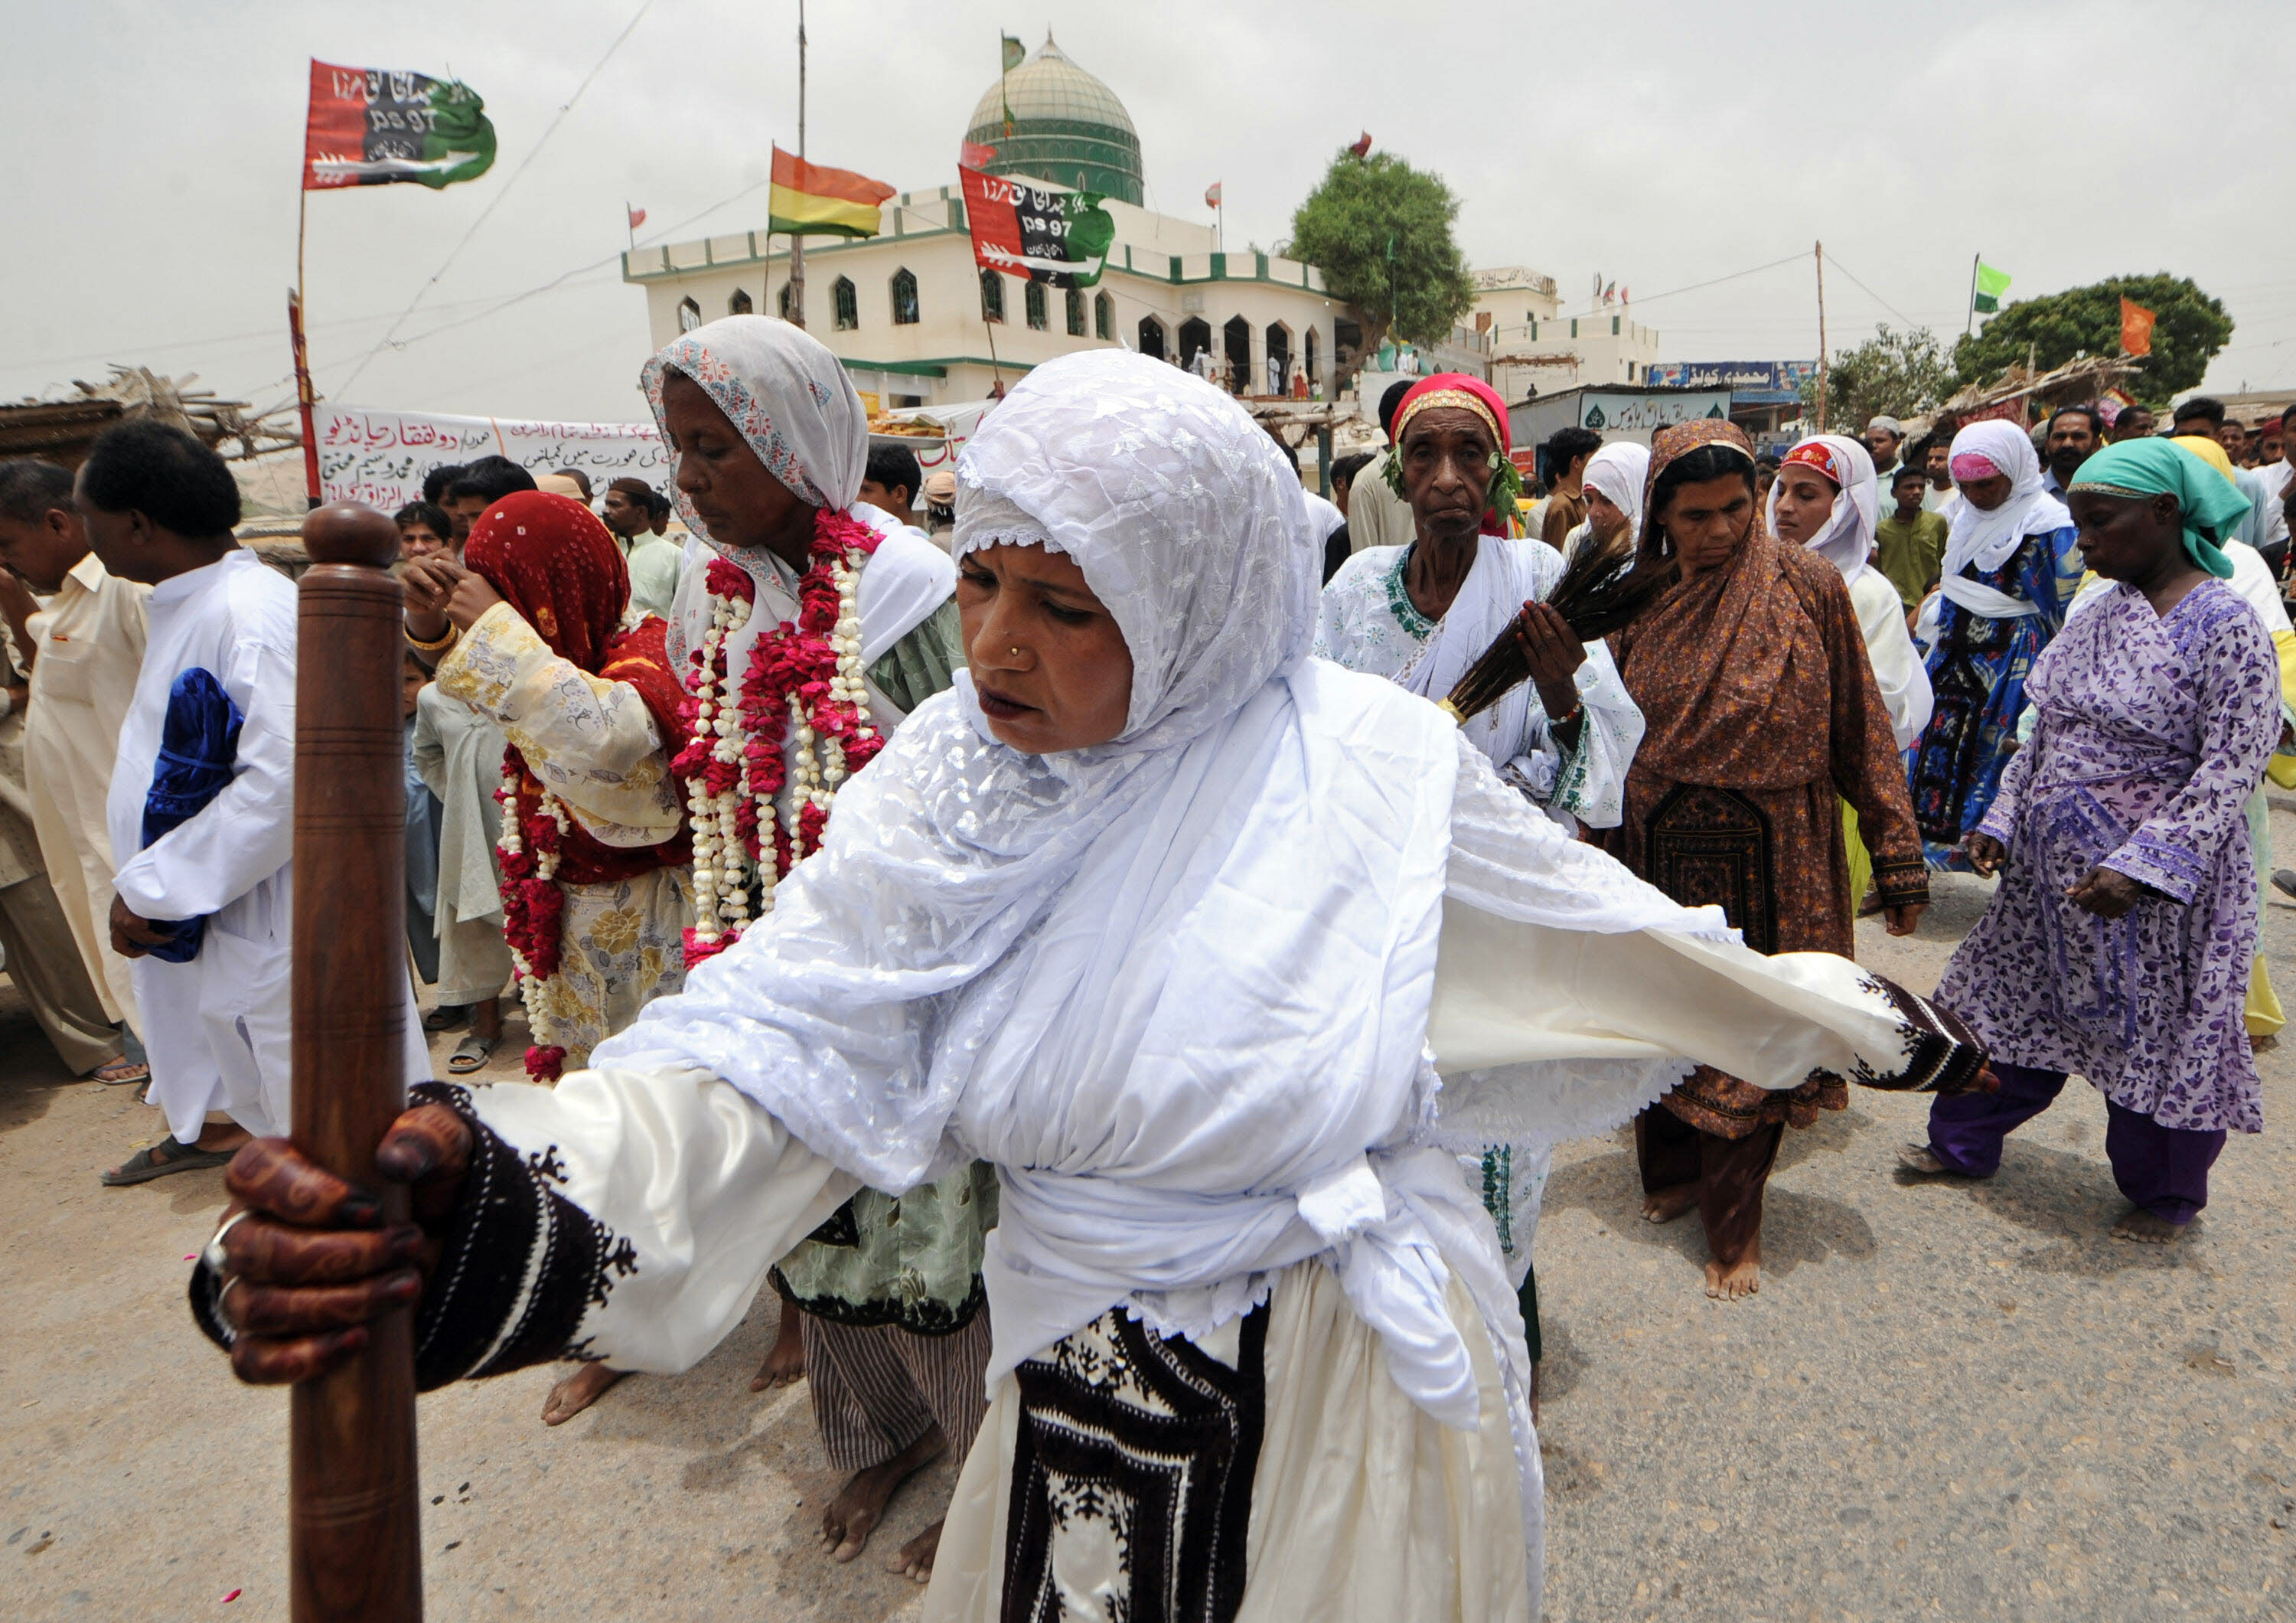 Pakistani devotees dance on the third day of the Sheedi festival at The Manghopir Shrine on the outskirts of Karachi on July 6, 2008. The Sheedi festival, named after the inhabitants of the area, is held near Saint Kwaja Hasan's shrine which is said to be the oldest Sufi shrine in the city. Sheedis, a lower class community in the city, follow the legend which says that saints found redemption here and during the festival feed the sacred crocodiles, beat drums and other musical instruments and sing songs. AFP PHOTO/ Asif HASSAN